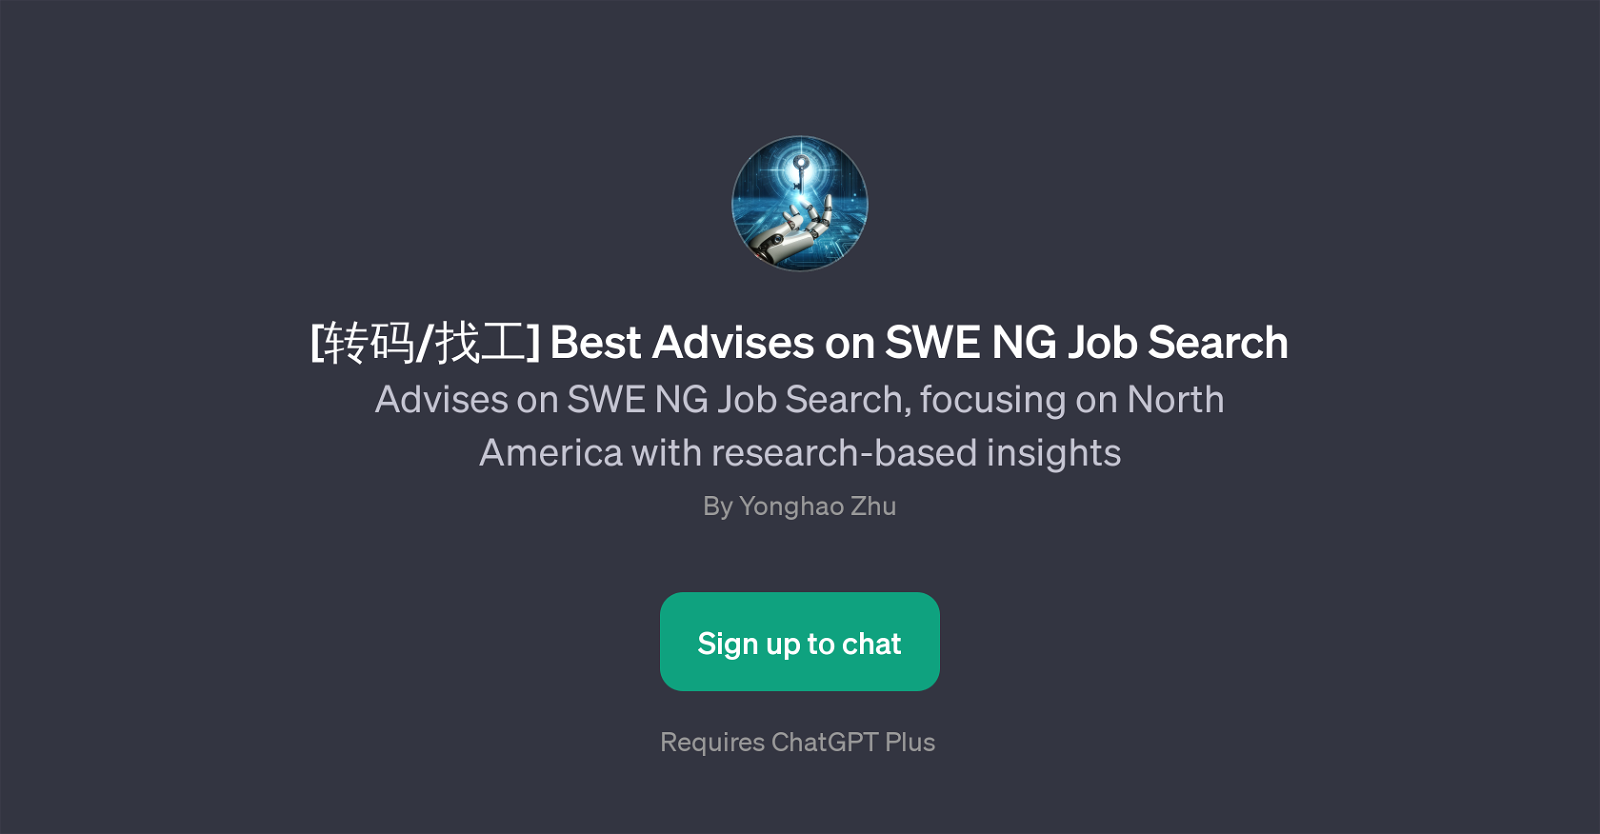 Best Advises on SWE NG Job Search website